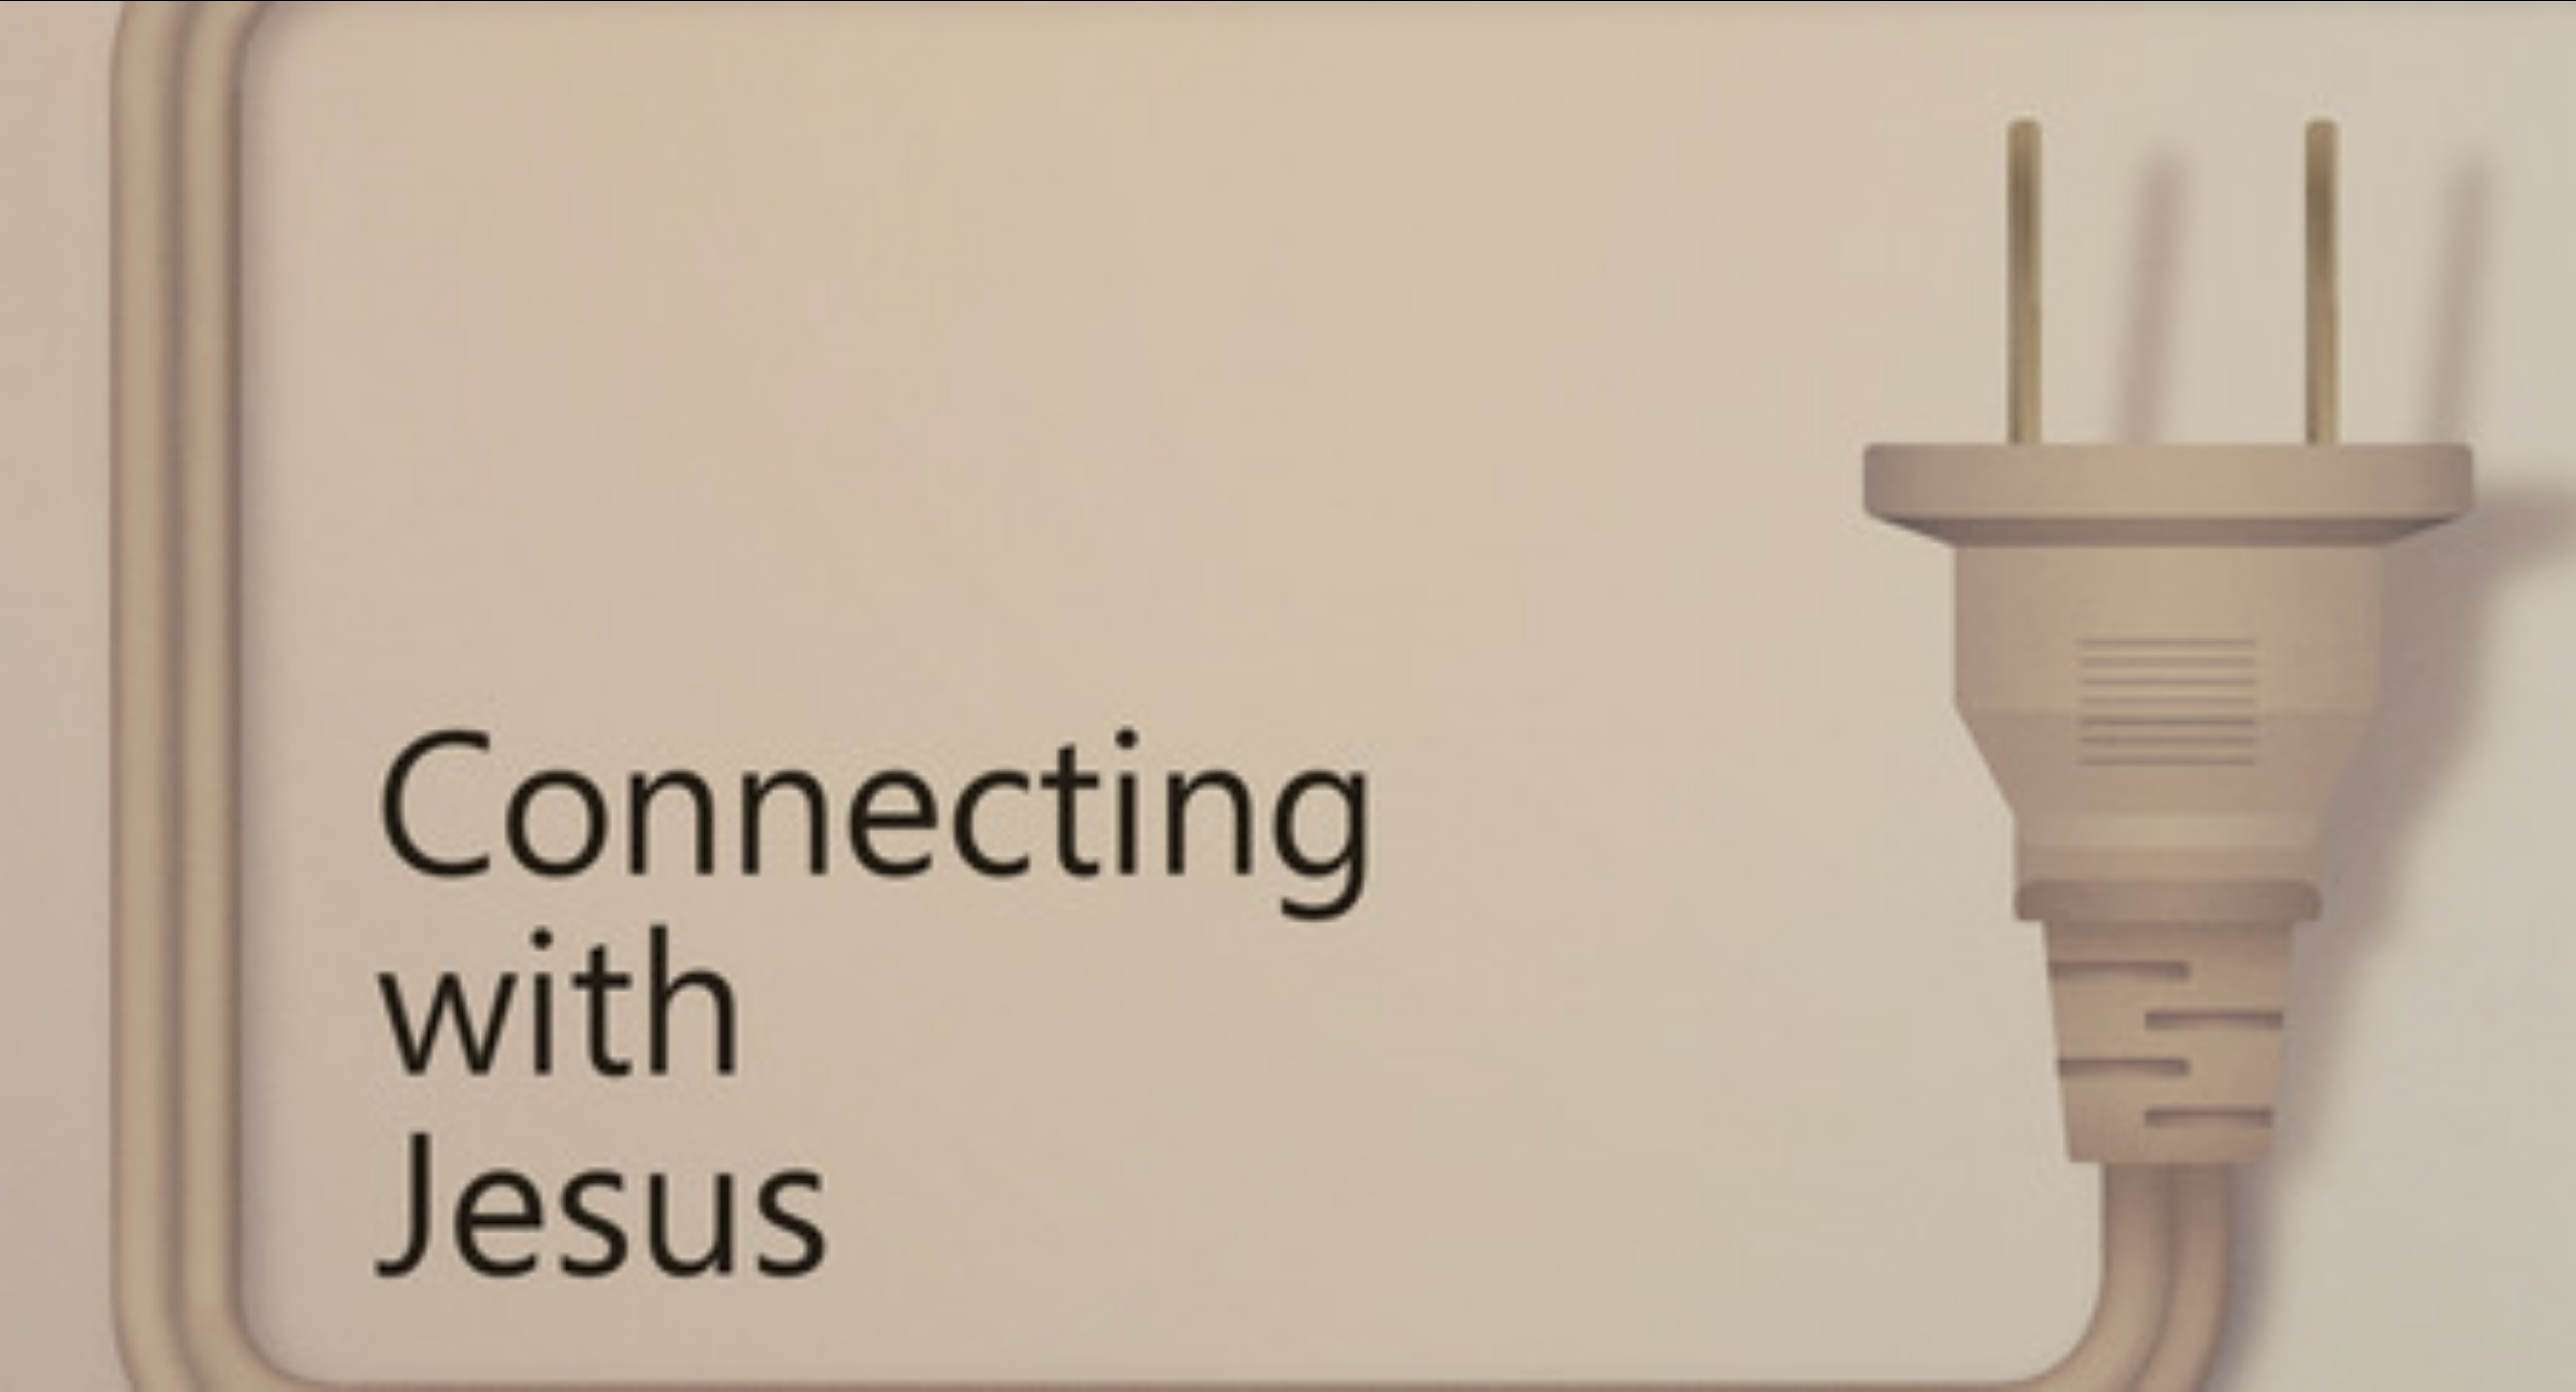 Connecting with Jesus